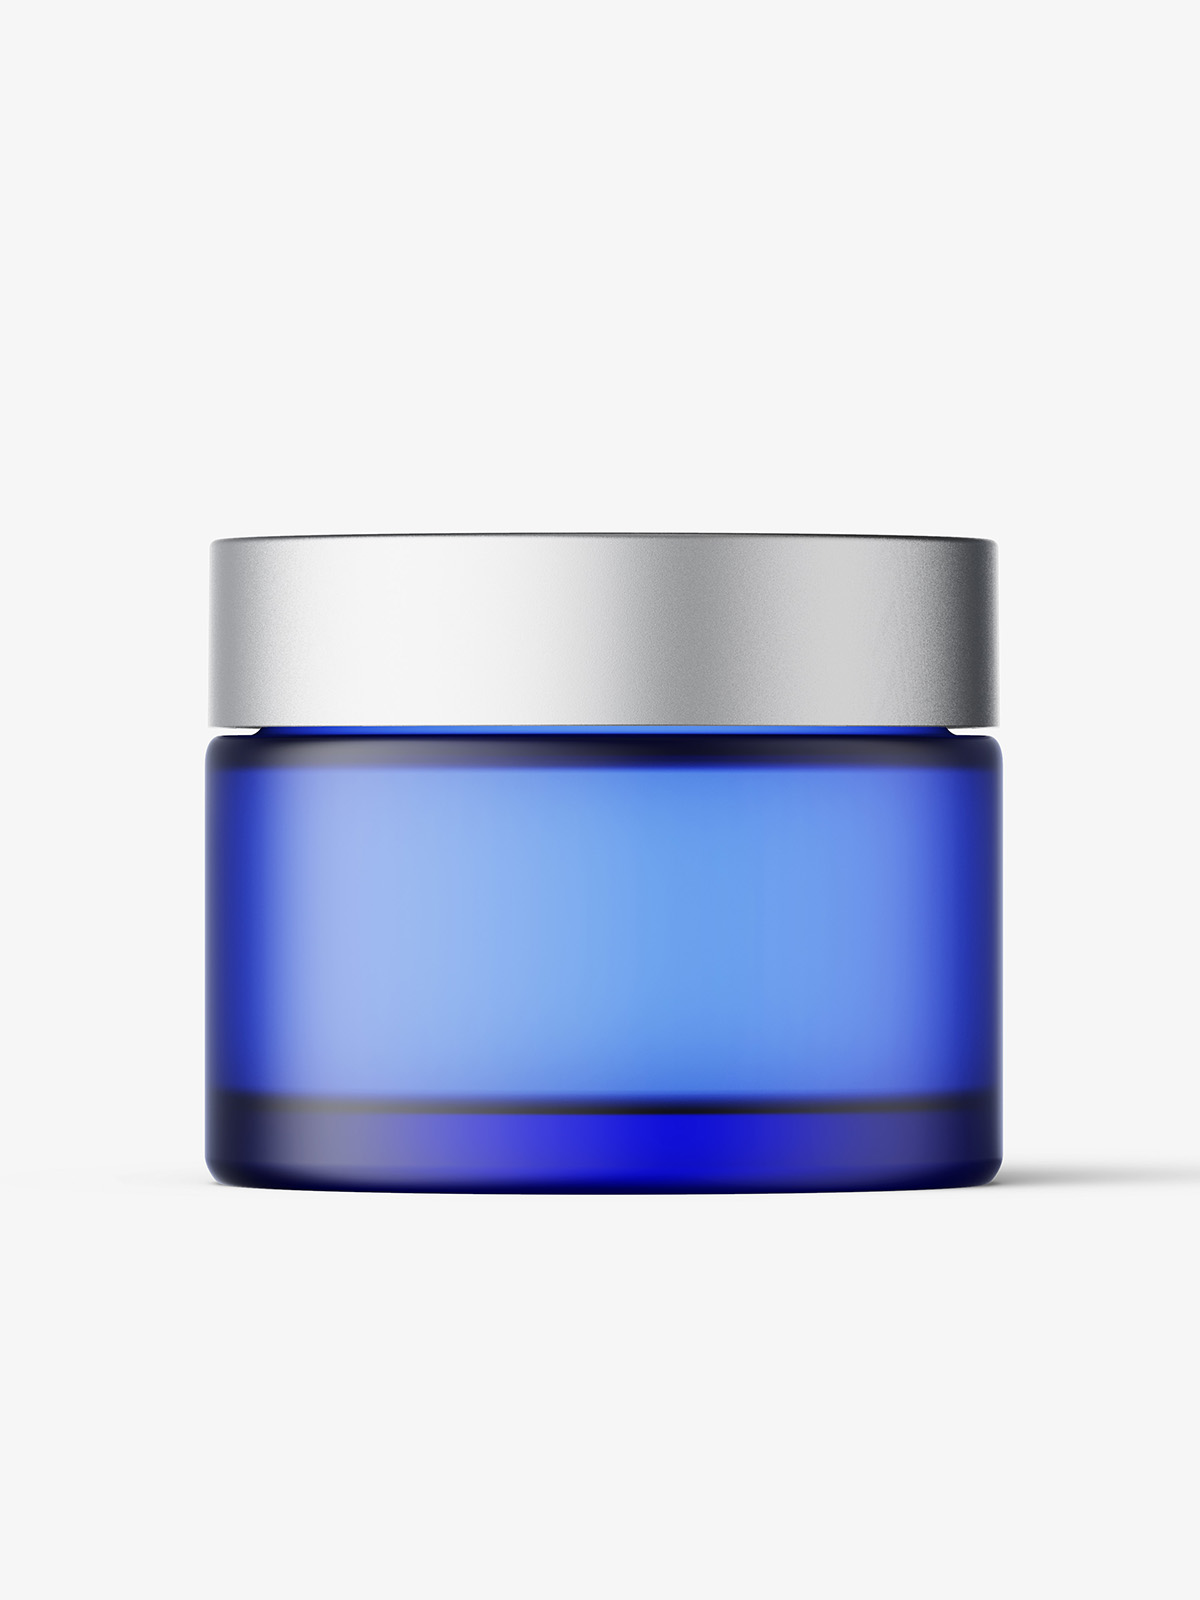 Download Frosted blue cosmetic jar with metallic cap mockup ...